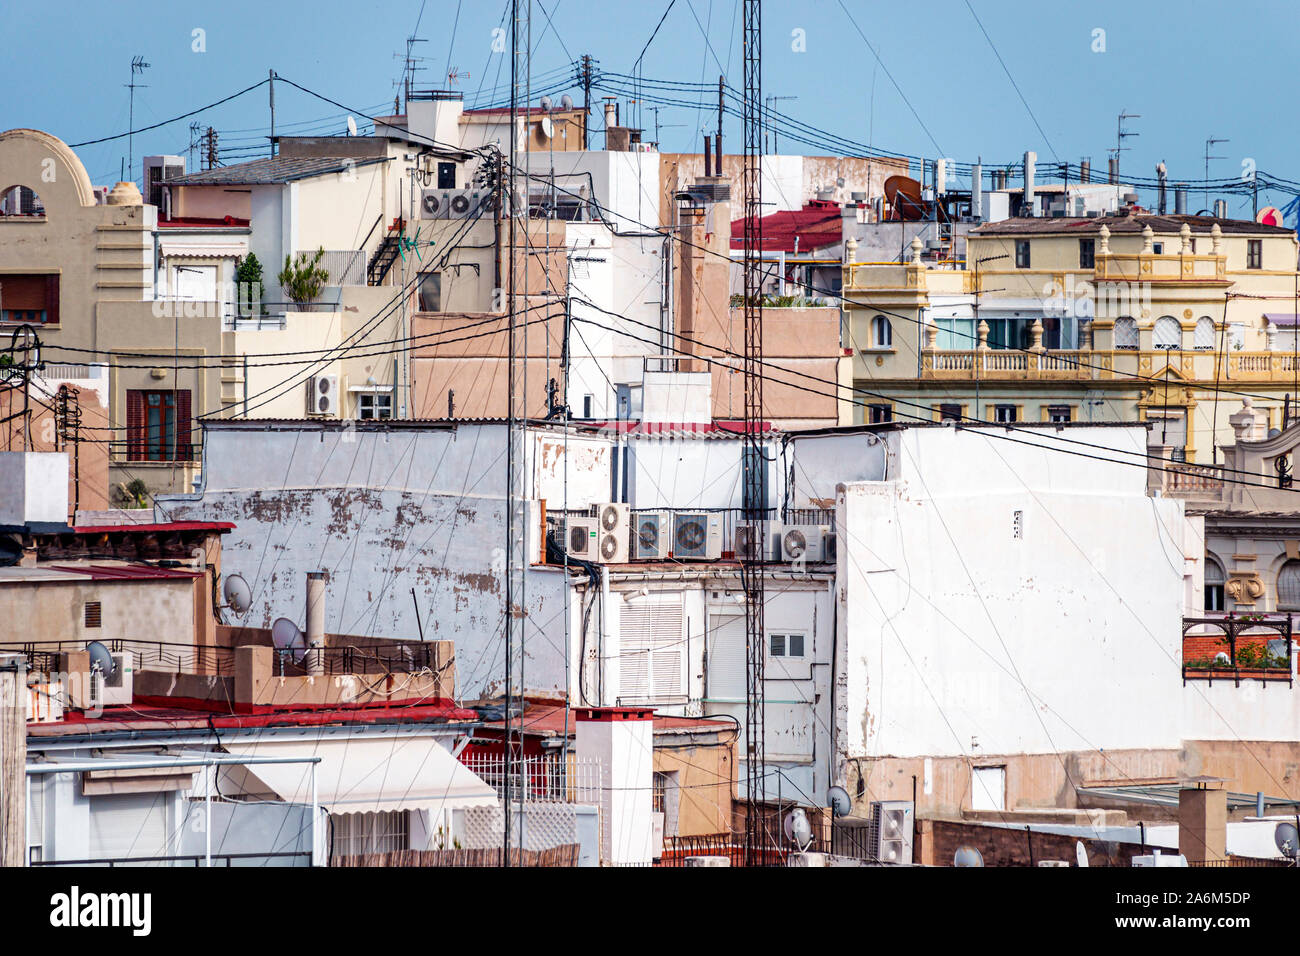 Valencia Spain Hispanic,Ciutat Vella,old city,historic center,rooftop view,neighborhood,electric wire cable,antenna,AC air conditioning units,rooftops Stock Photo